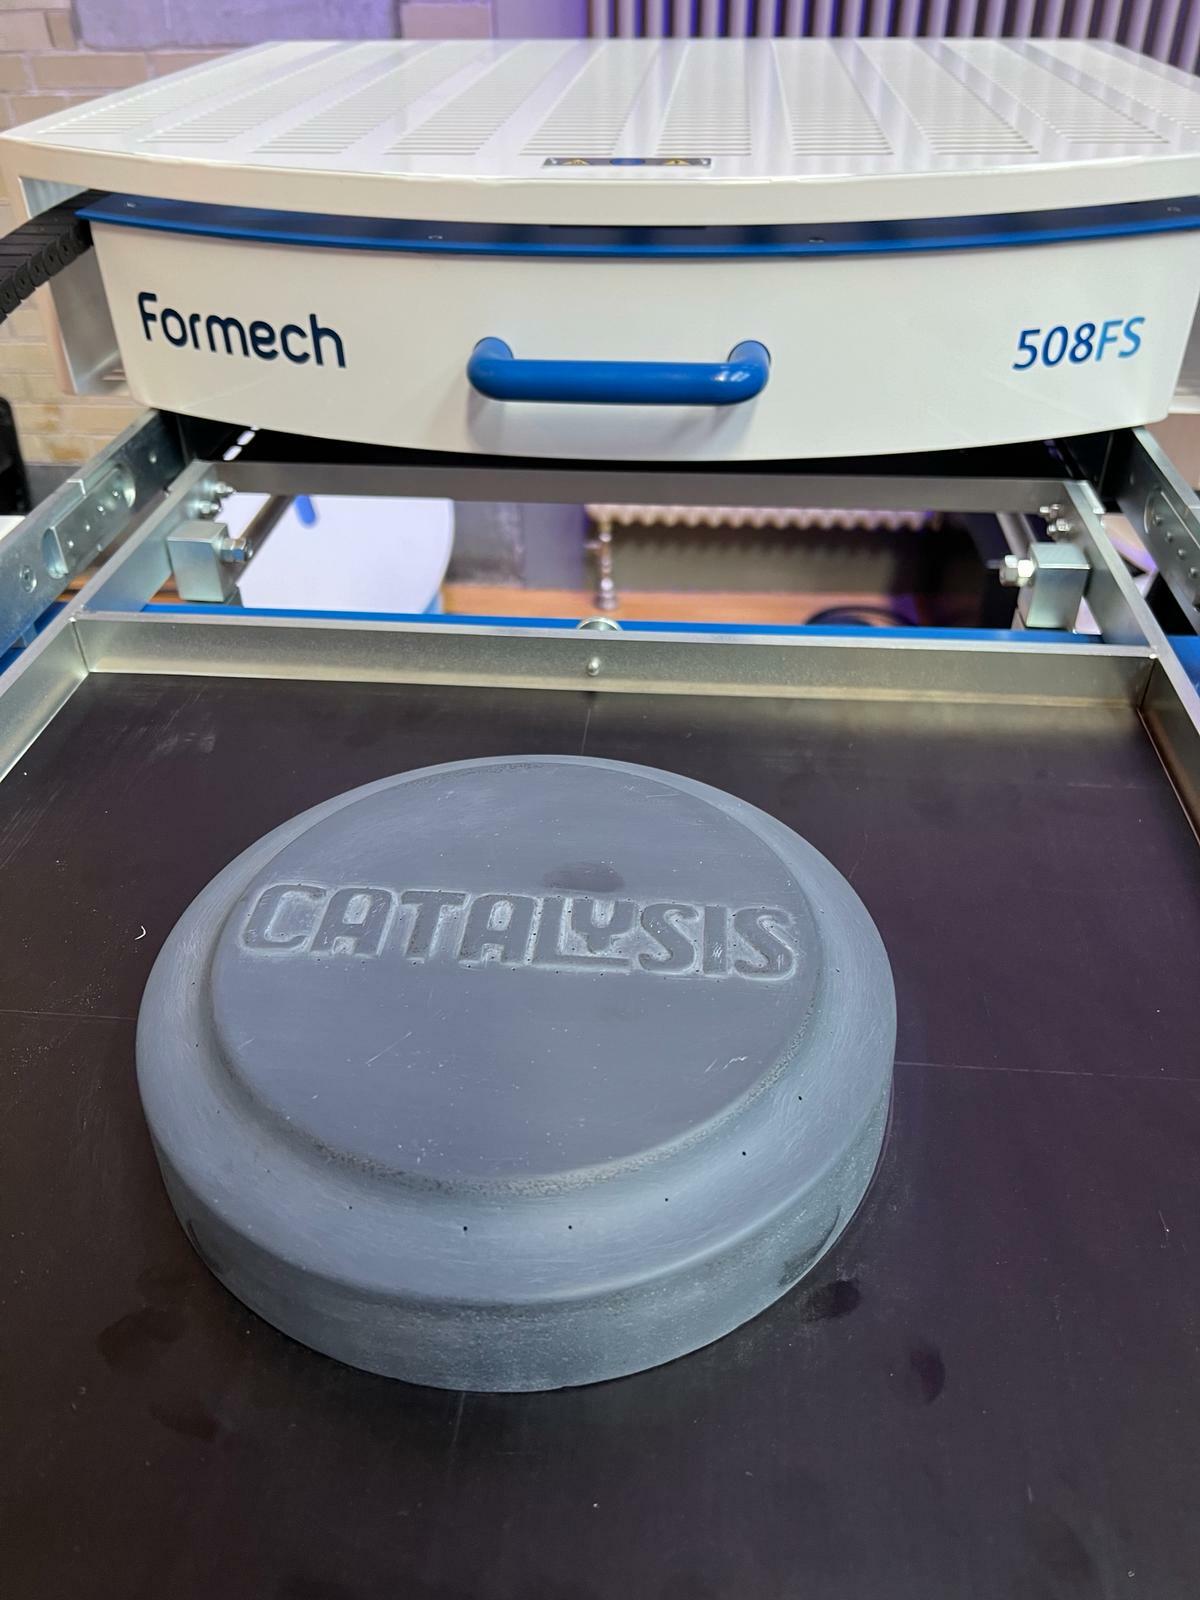 Catalysis 3D printed tool ready for vacuum forming